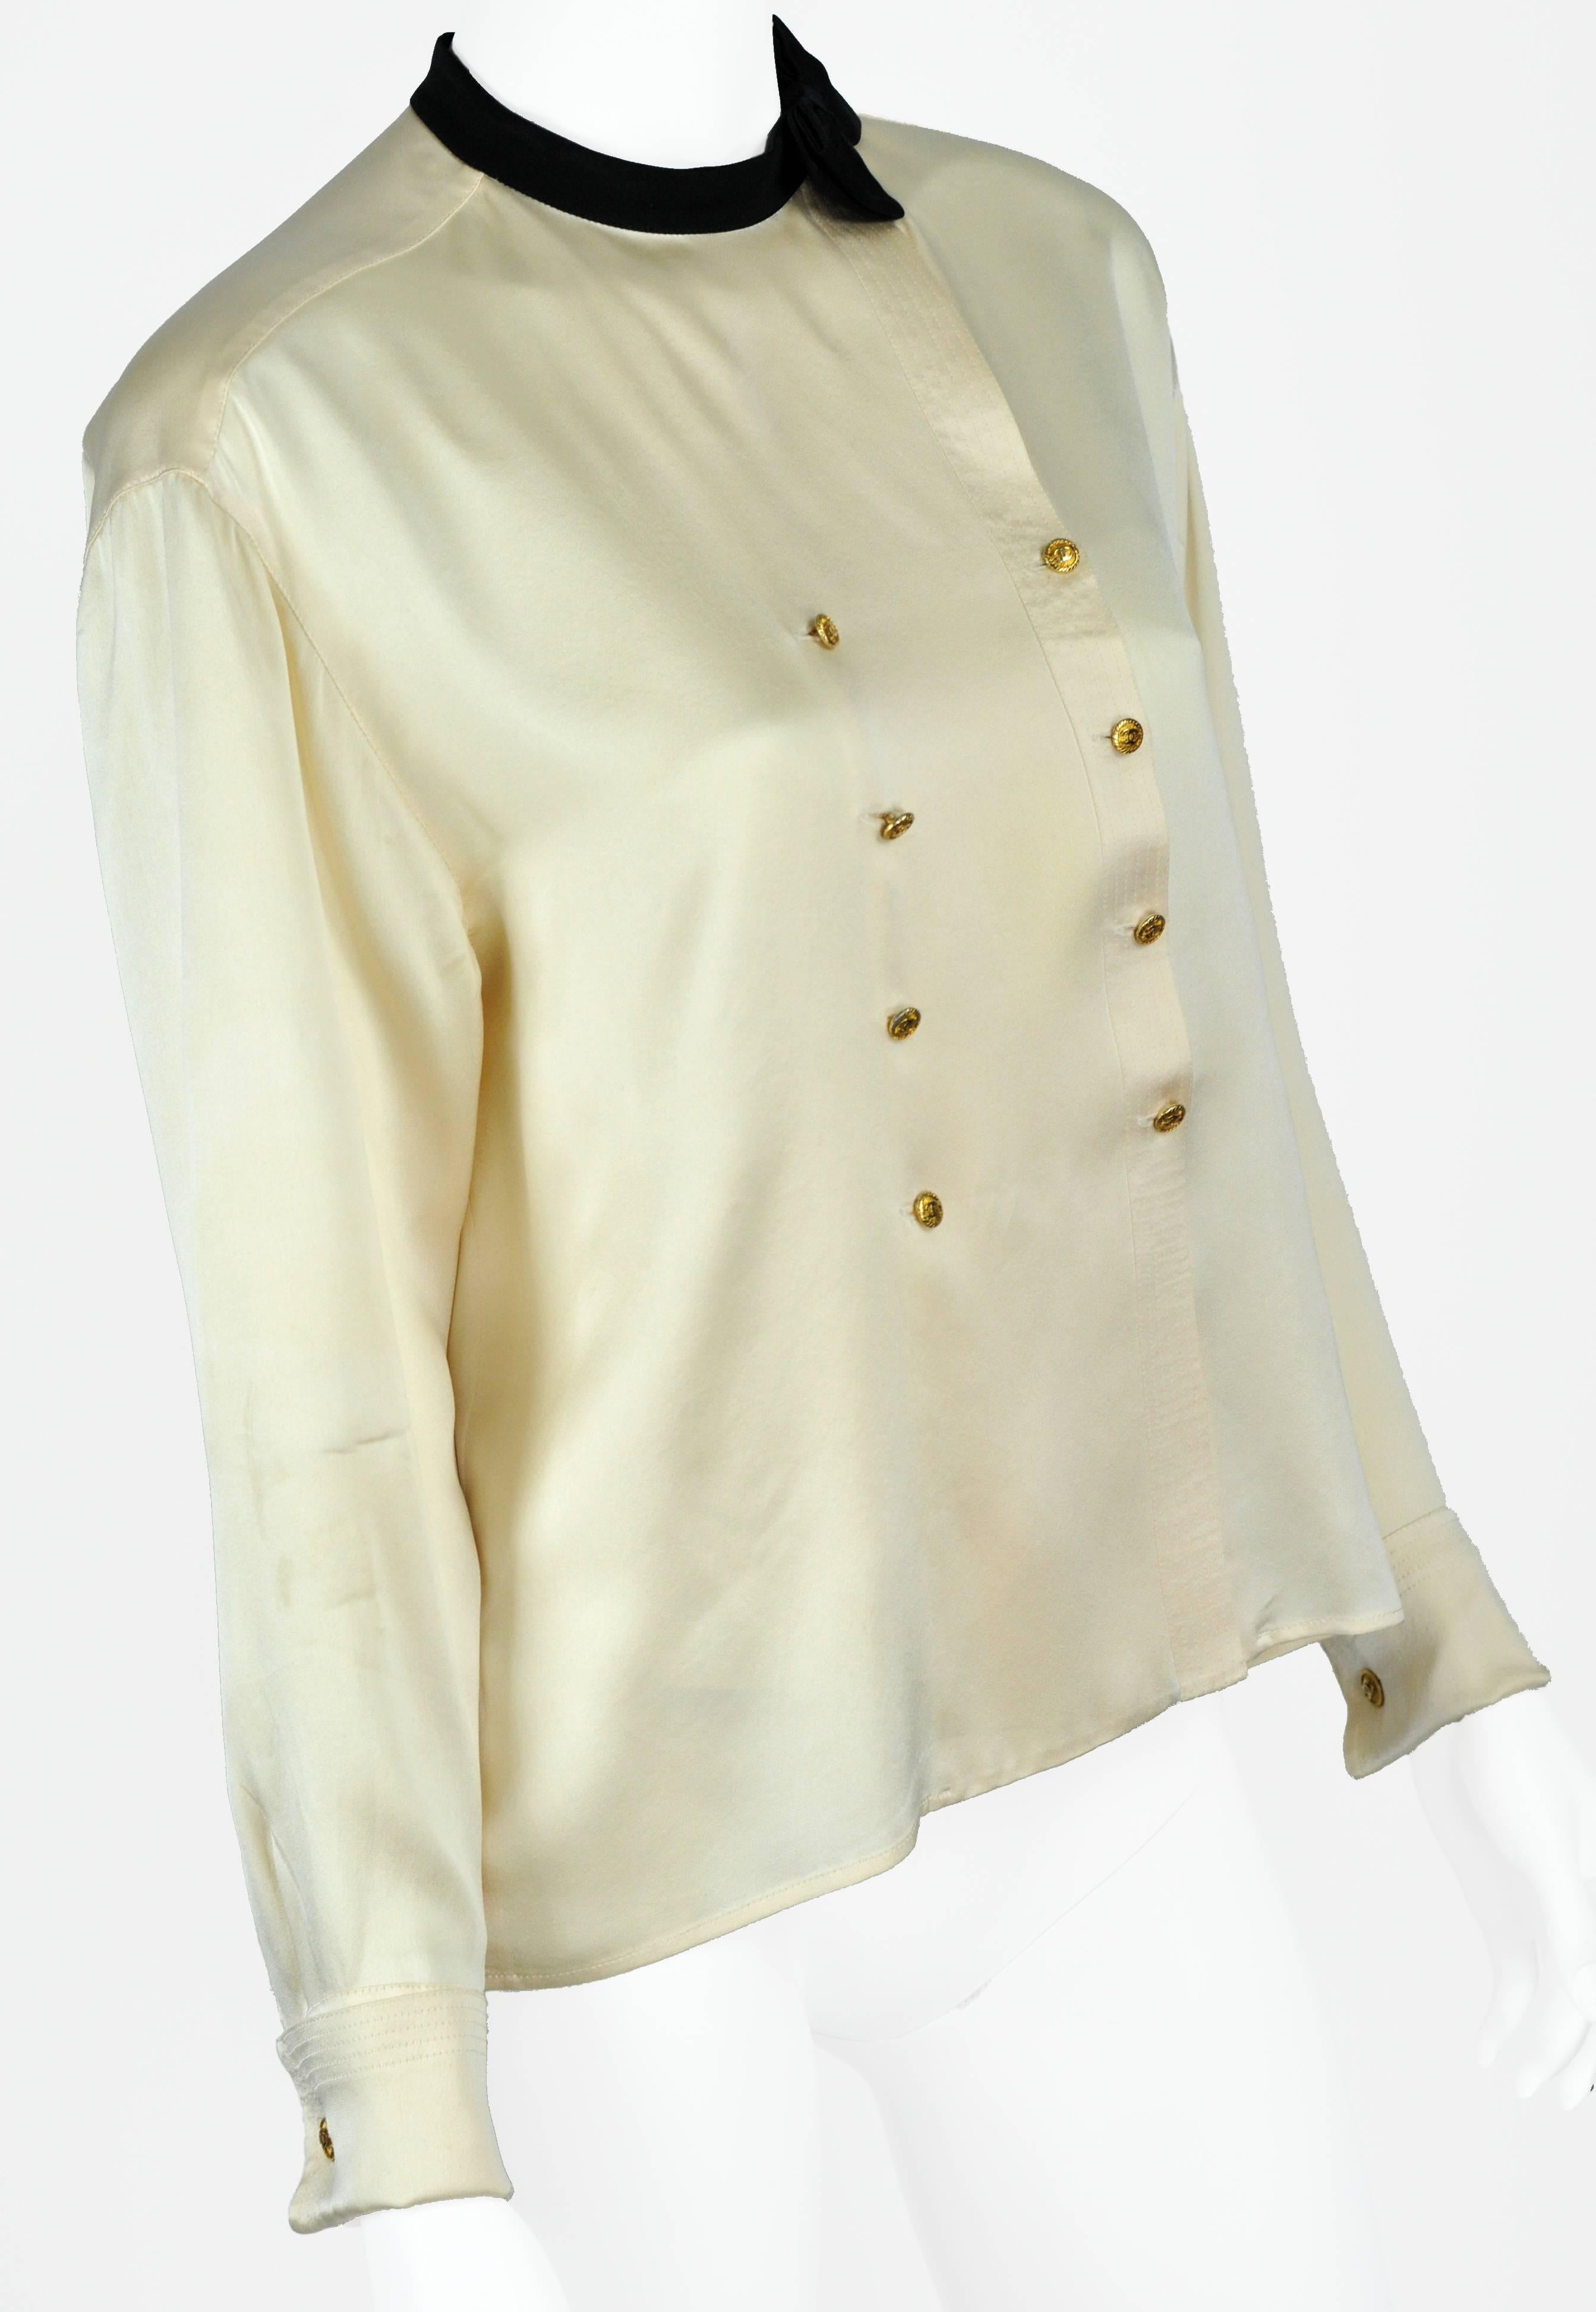 It is a miracle that a Vintage white satin Chanel blouse is in like new condition complete with matching cuff links. The killer part is the perfectly executed black satin bow at the neck and confirms that it is indeed of Chanel Boutique label